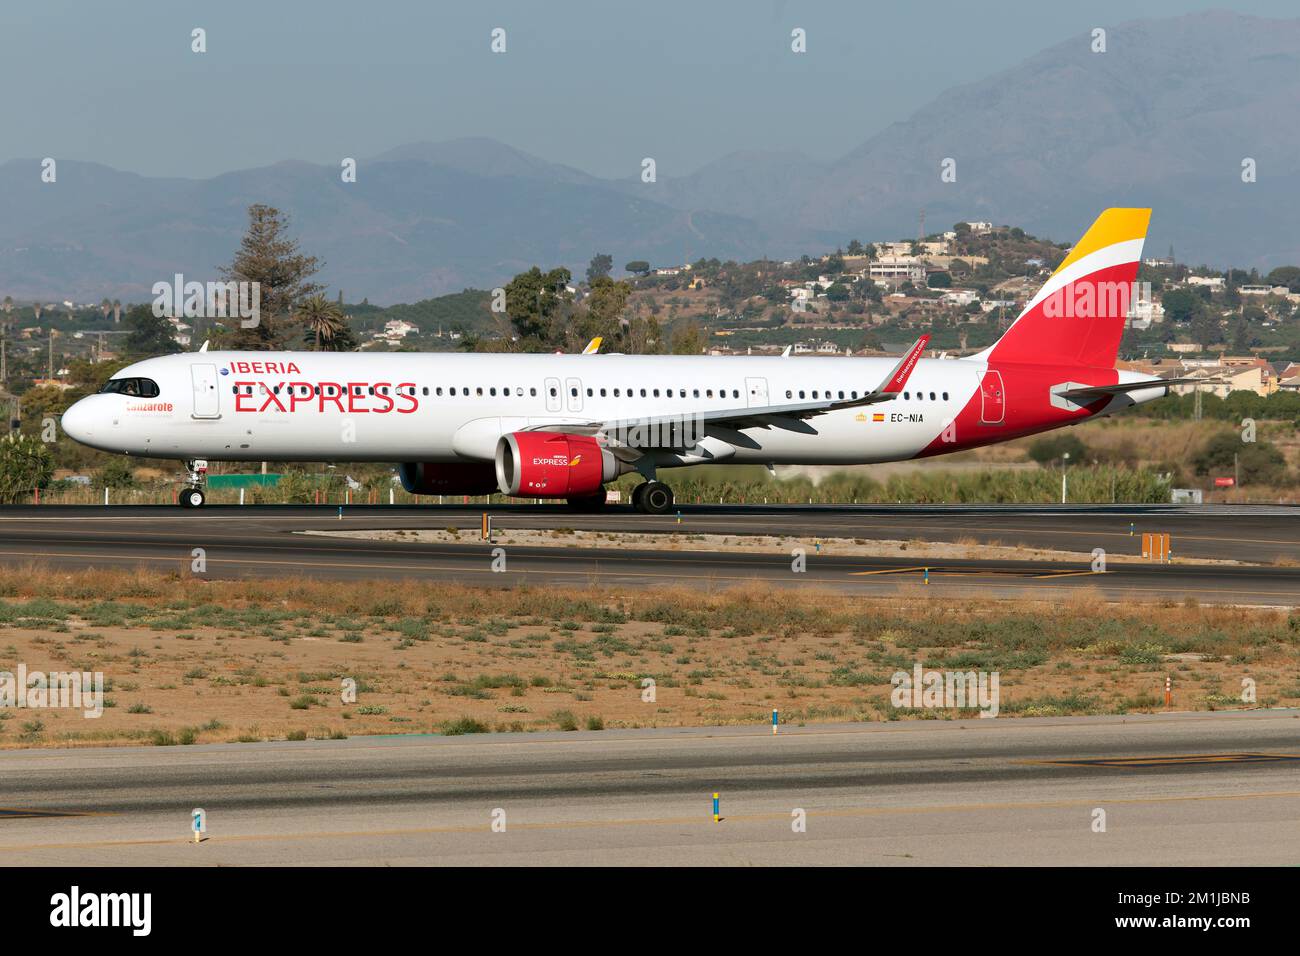 Malaga, Spain. 21st Aug, 2022. An Iberia Express Airbus 321 NEO ready to take off from Malaga Costa del sol airport.Iberia Express is a Spanish low-cost airline owned by Iberia, which operates short- and medium-haul routes from its parent airline's hub at Adolfo Suárez Madrid-Barajas Airport, providing feeder flights onto Iberia's long-haul network. (Photo by Fabrizio Gandolfo/SOPA Images/Sipa USA) Credit: Sipa USA/Alamy Live News Stock Photo